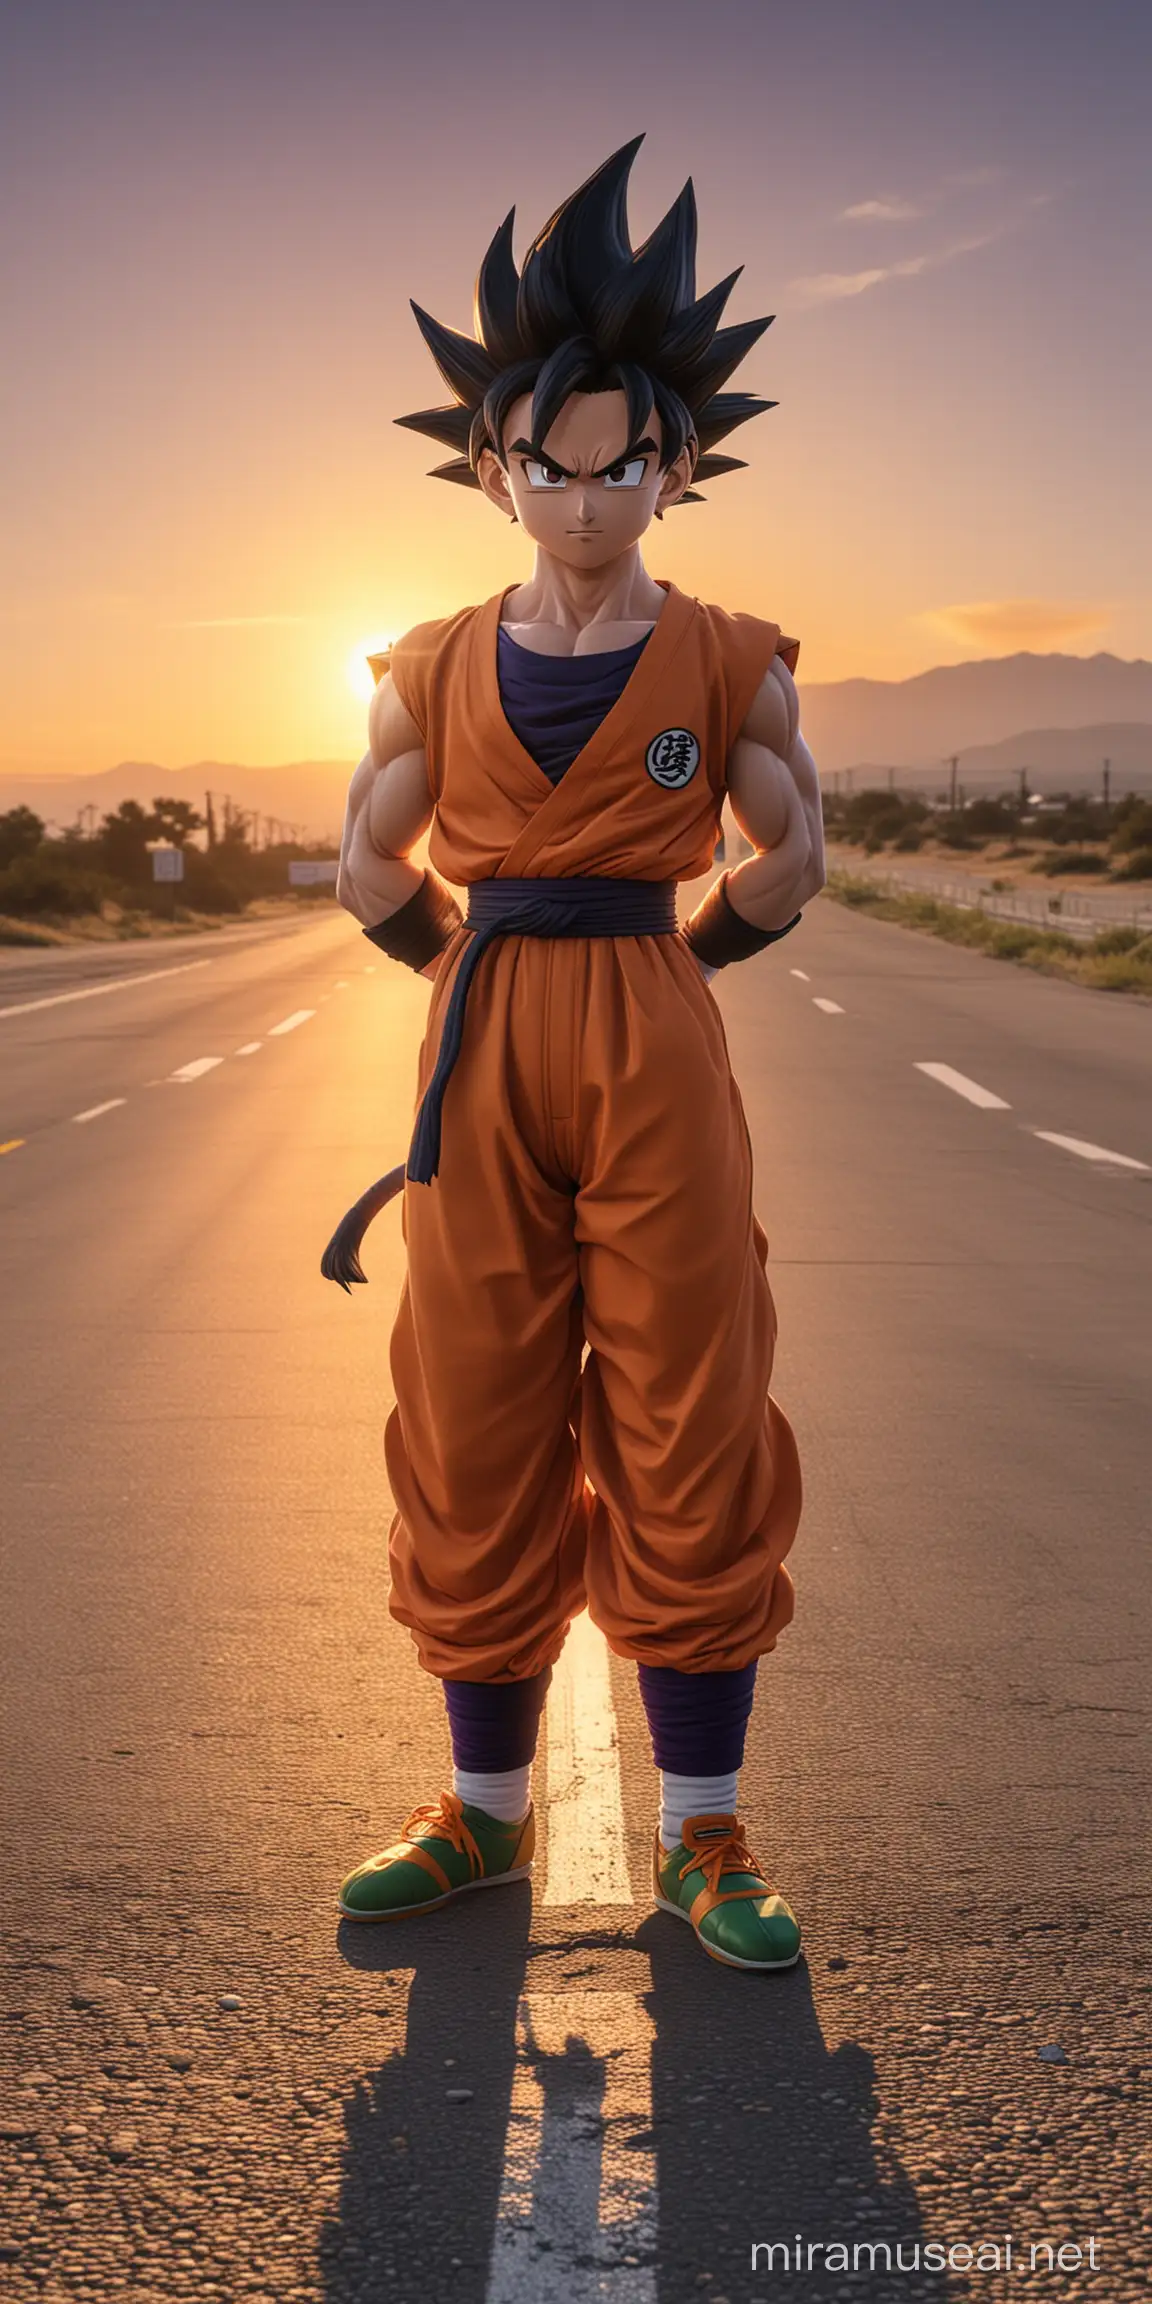 Gohan Dragon Ball Z Standing on Road at Sunset